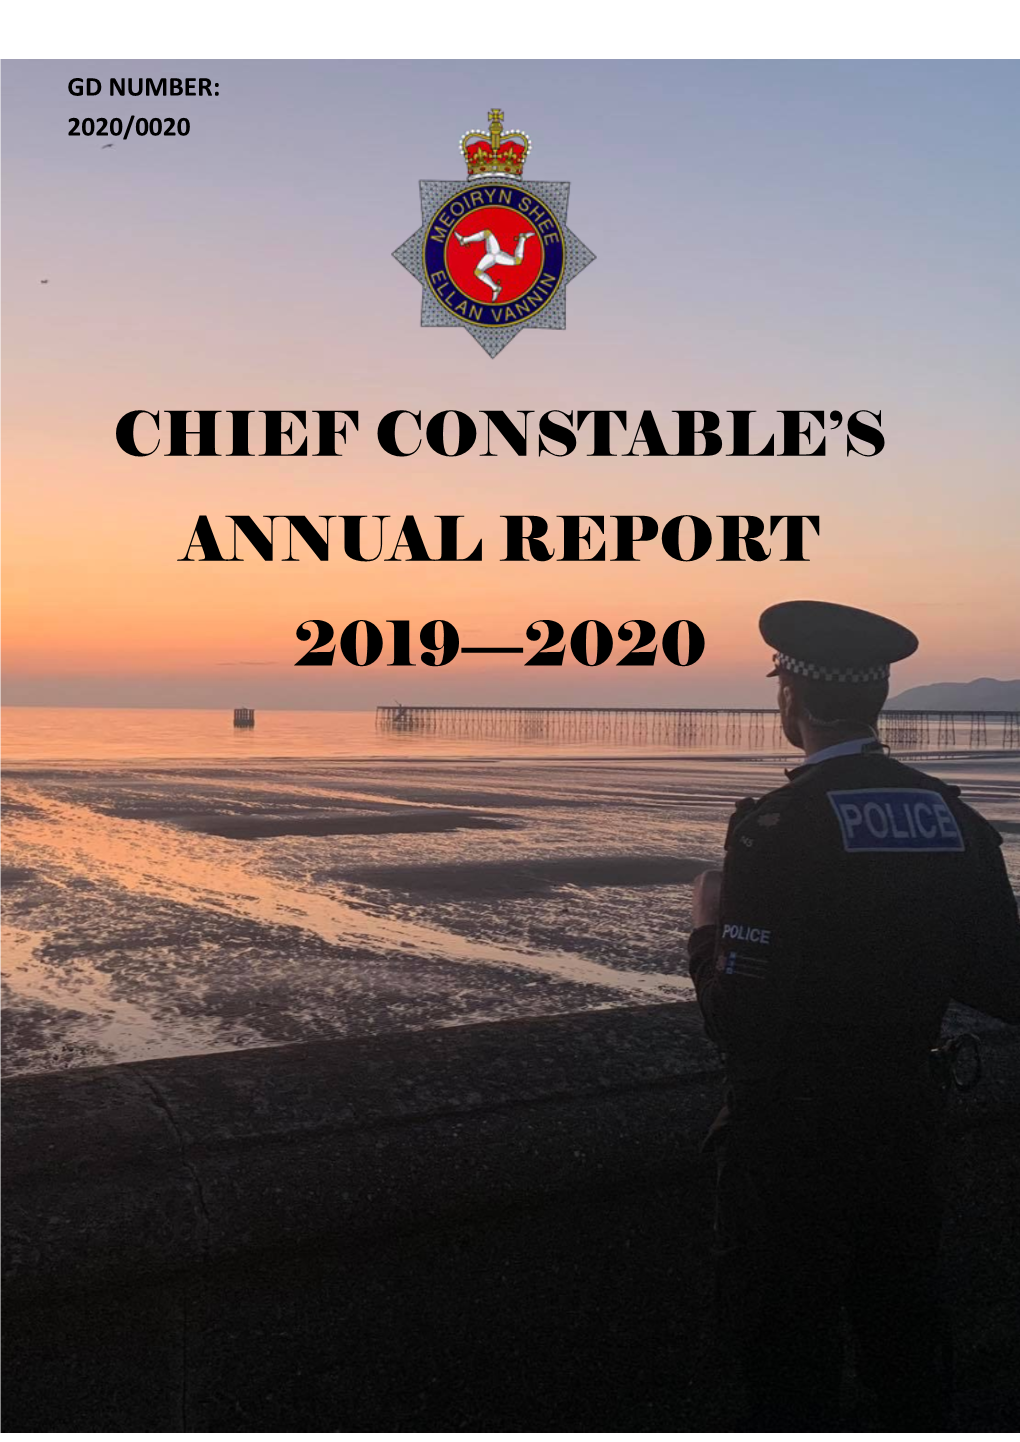 Chief Constable's Annual Report